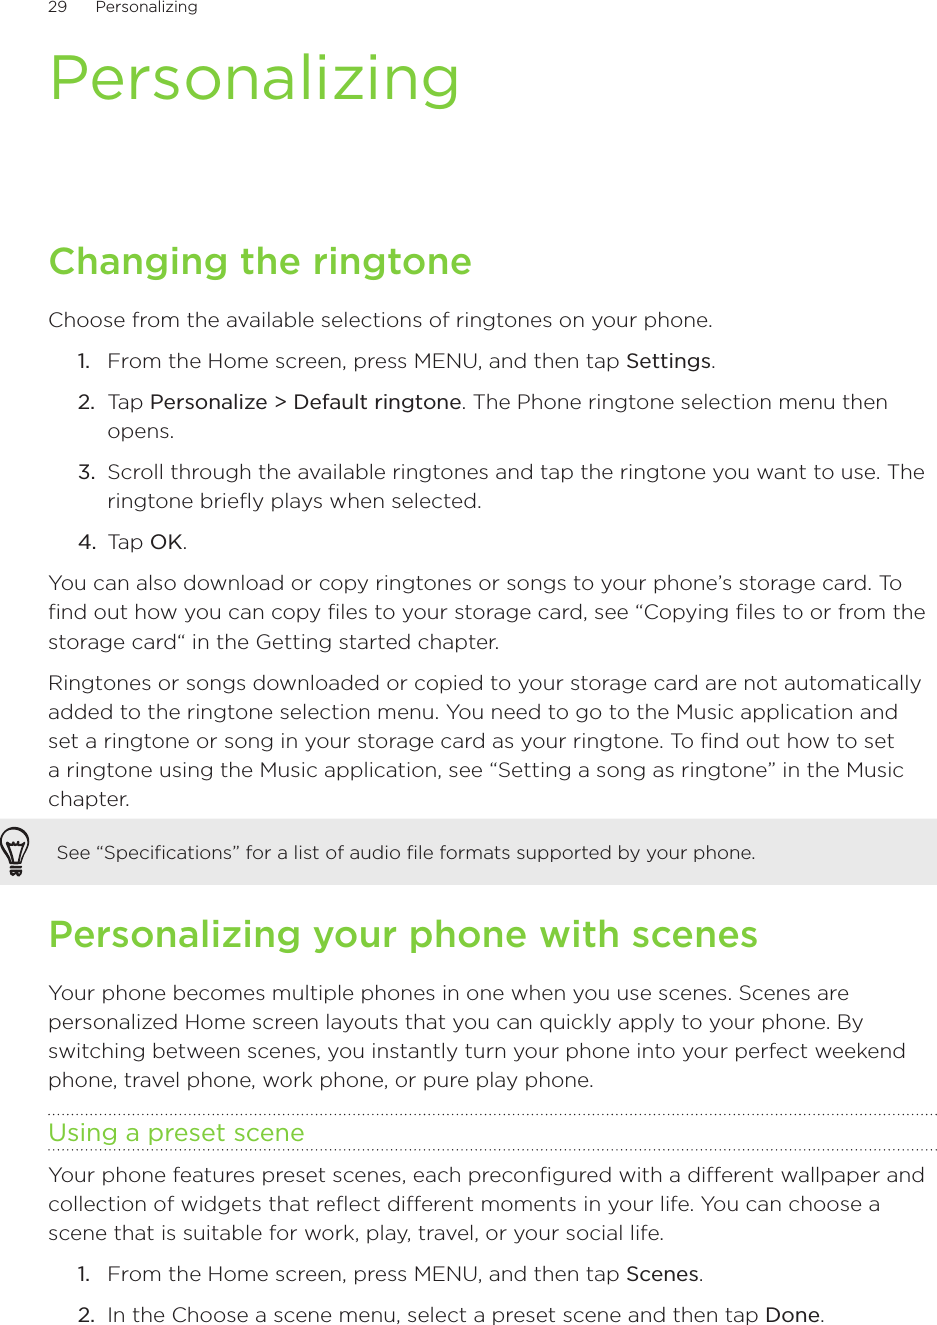 29      Personalizing      PersonalizingChanging the ringtoneChoose from the available selections of ringtones on your phone.From the Home screen, press MENU, and then tap Settings.Tap Personalize &gt; Default ringtone. The Phone ringtone selection menu then opens.Scroll through the available ringtones and tap the ringtone you want to use. The ringtone briefly plays when selected.Tap OK.You can also download or copy ringtones or songs to your phone’s storage card. To find out how you can copy files to your storage card, see “Copying files to or from the storage card“ in the Getting started chapter.Ringtones or songs downloaded or copied to your storage card are not automatically added to the ringtone selection menu. You need to go to the Music application and set a ringtone or song in your storage card as your ringtone. To find out how to set a ringtone using the Music application, see “Setting a song as ringtone” in the Music chapter. See “Specifications” for a list of audio file formats supported by your phone.Personalizing your phone with scenesYour phone becomes multiple phones in one when you use scenes. Scenes are personalized Home screen layouts that you can quickly apply to your phone. By switching between scenes, you instantly turn your phone into your perfect weekend phone, travel phone, work phone, or pure play phone.Using a preset sceneYour phone features preset scenes, each preconfigured with a different wallpaper and collection of widgets that reflect different moments in your life. You can choose a scene that is suitable for work, play, travel, or your social life.From the Home screen, press MENU, and then tap Scenes.In the Choose a scene menu, select a preset scene and then tap Done.1.2.3.4.1.2.